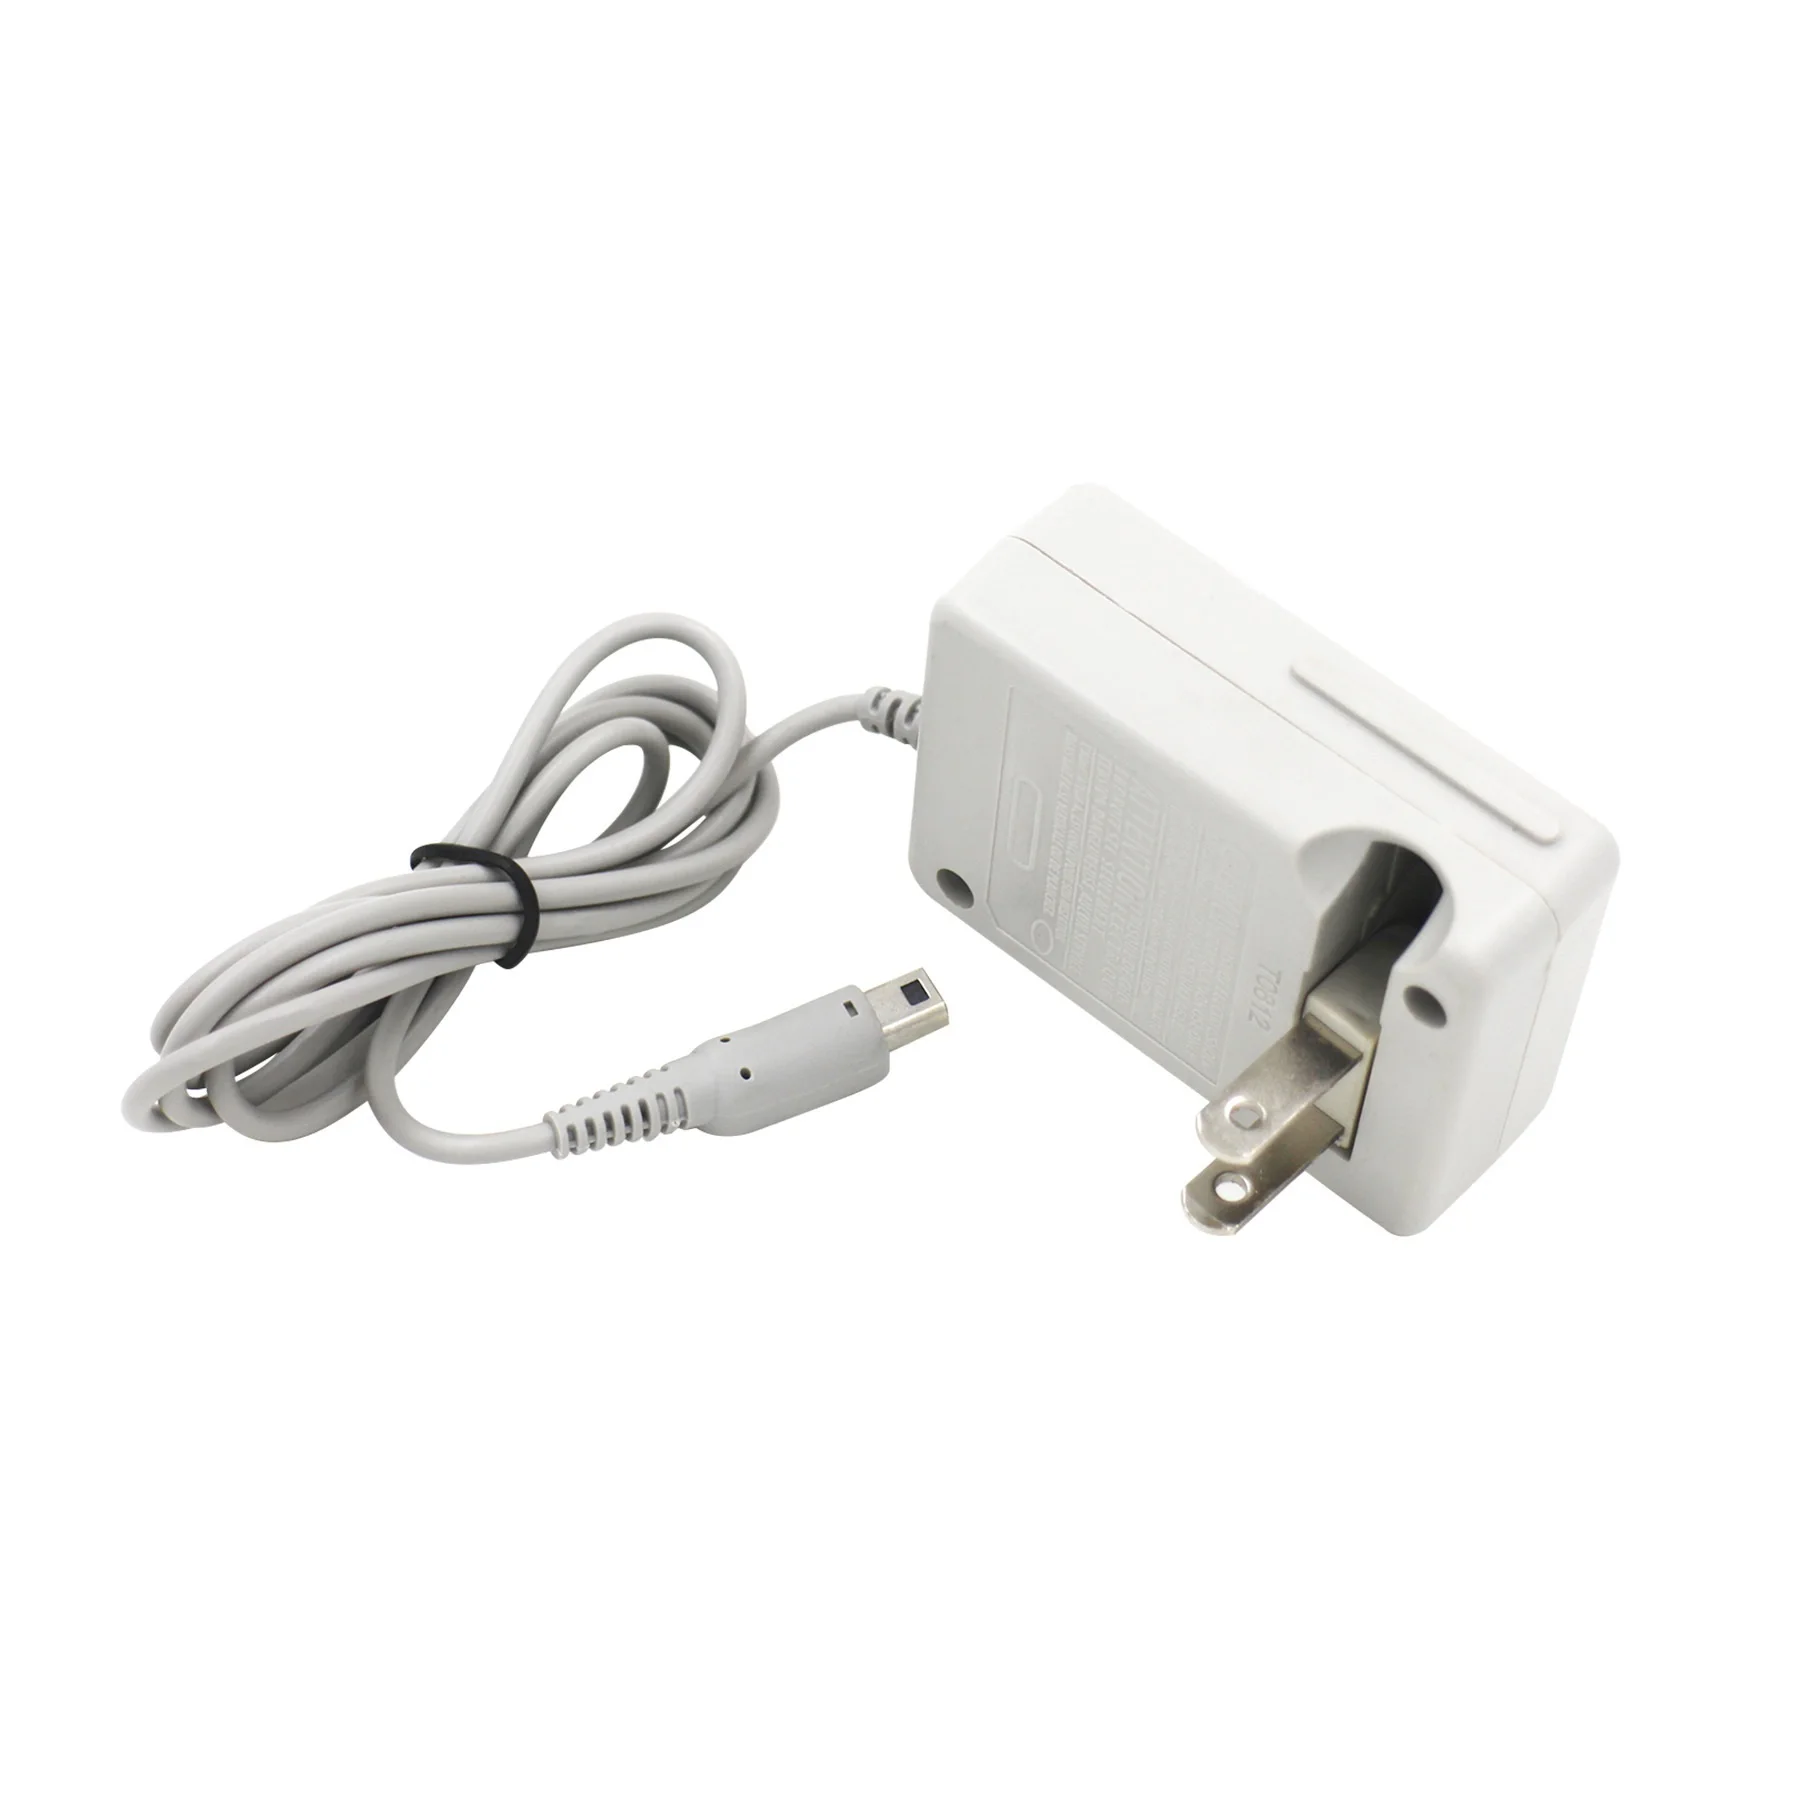 

AC 100-240V Travel Wall EU Plug Charger Adapter Power Supply for Nintendo DSL DS Lite NDSL - Grey Piece 0.064kg (0.14lb.)